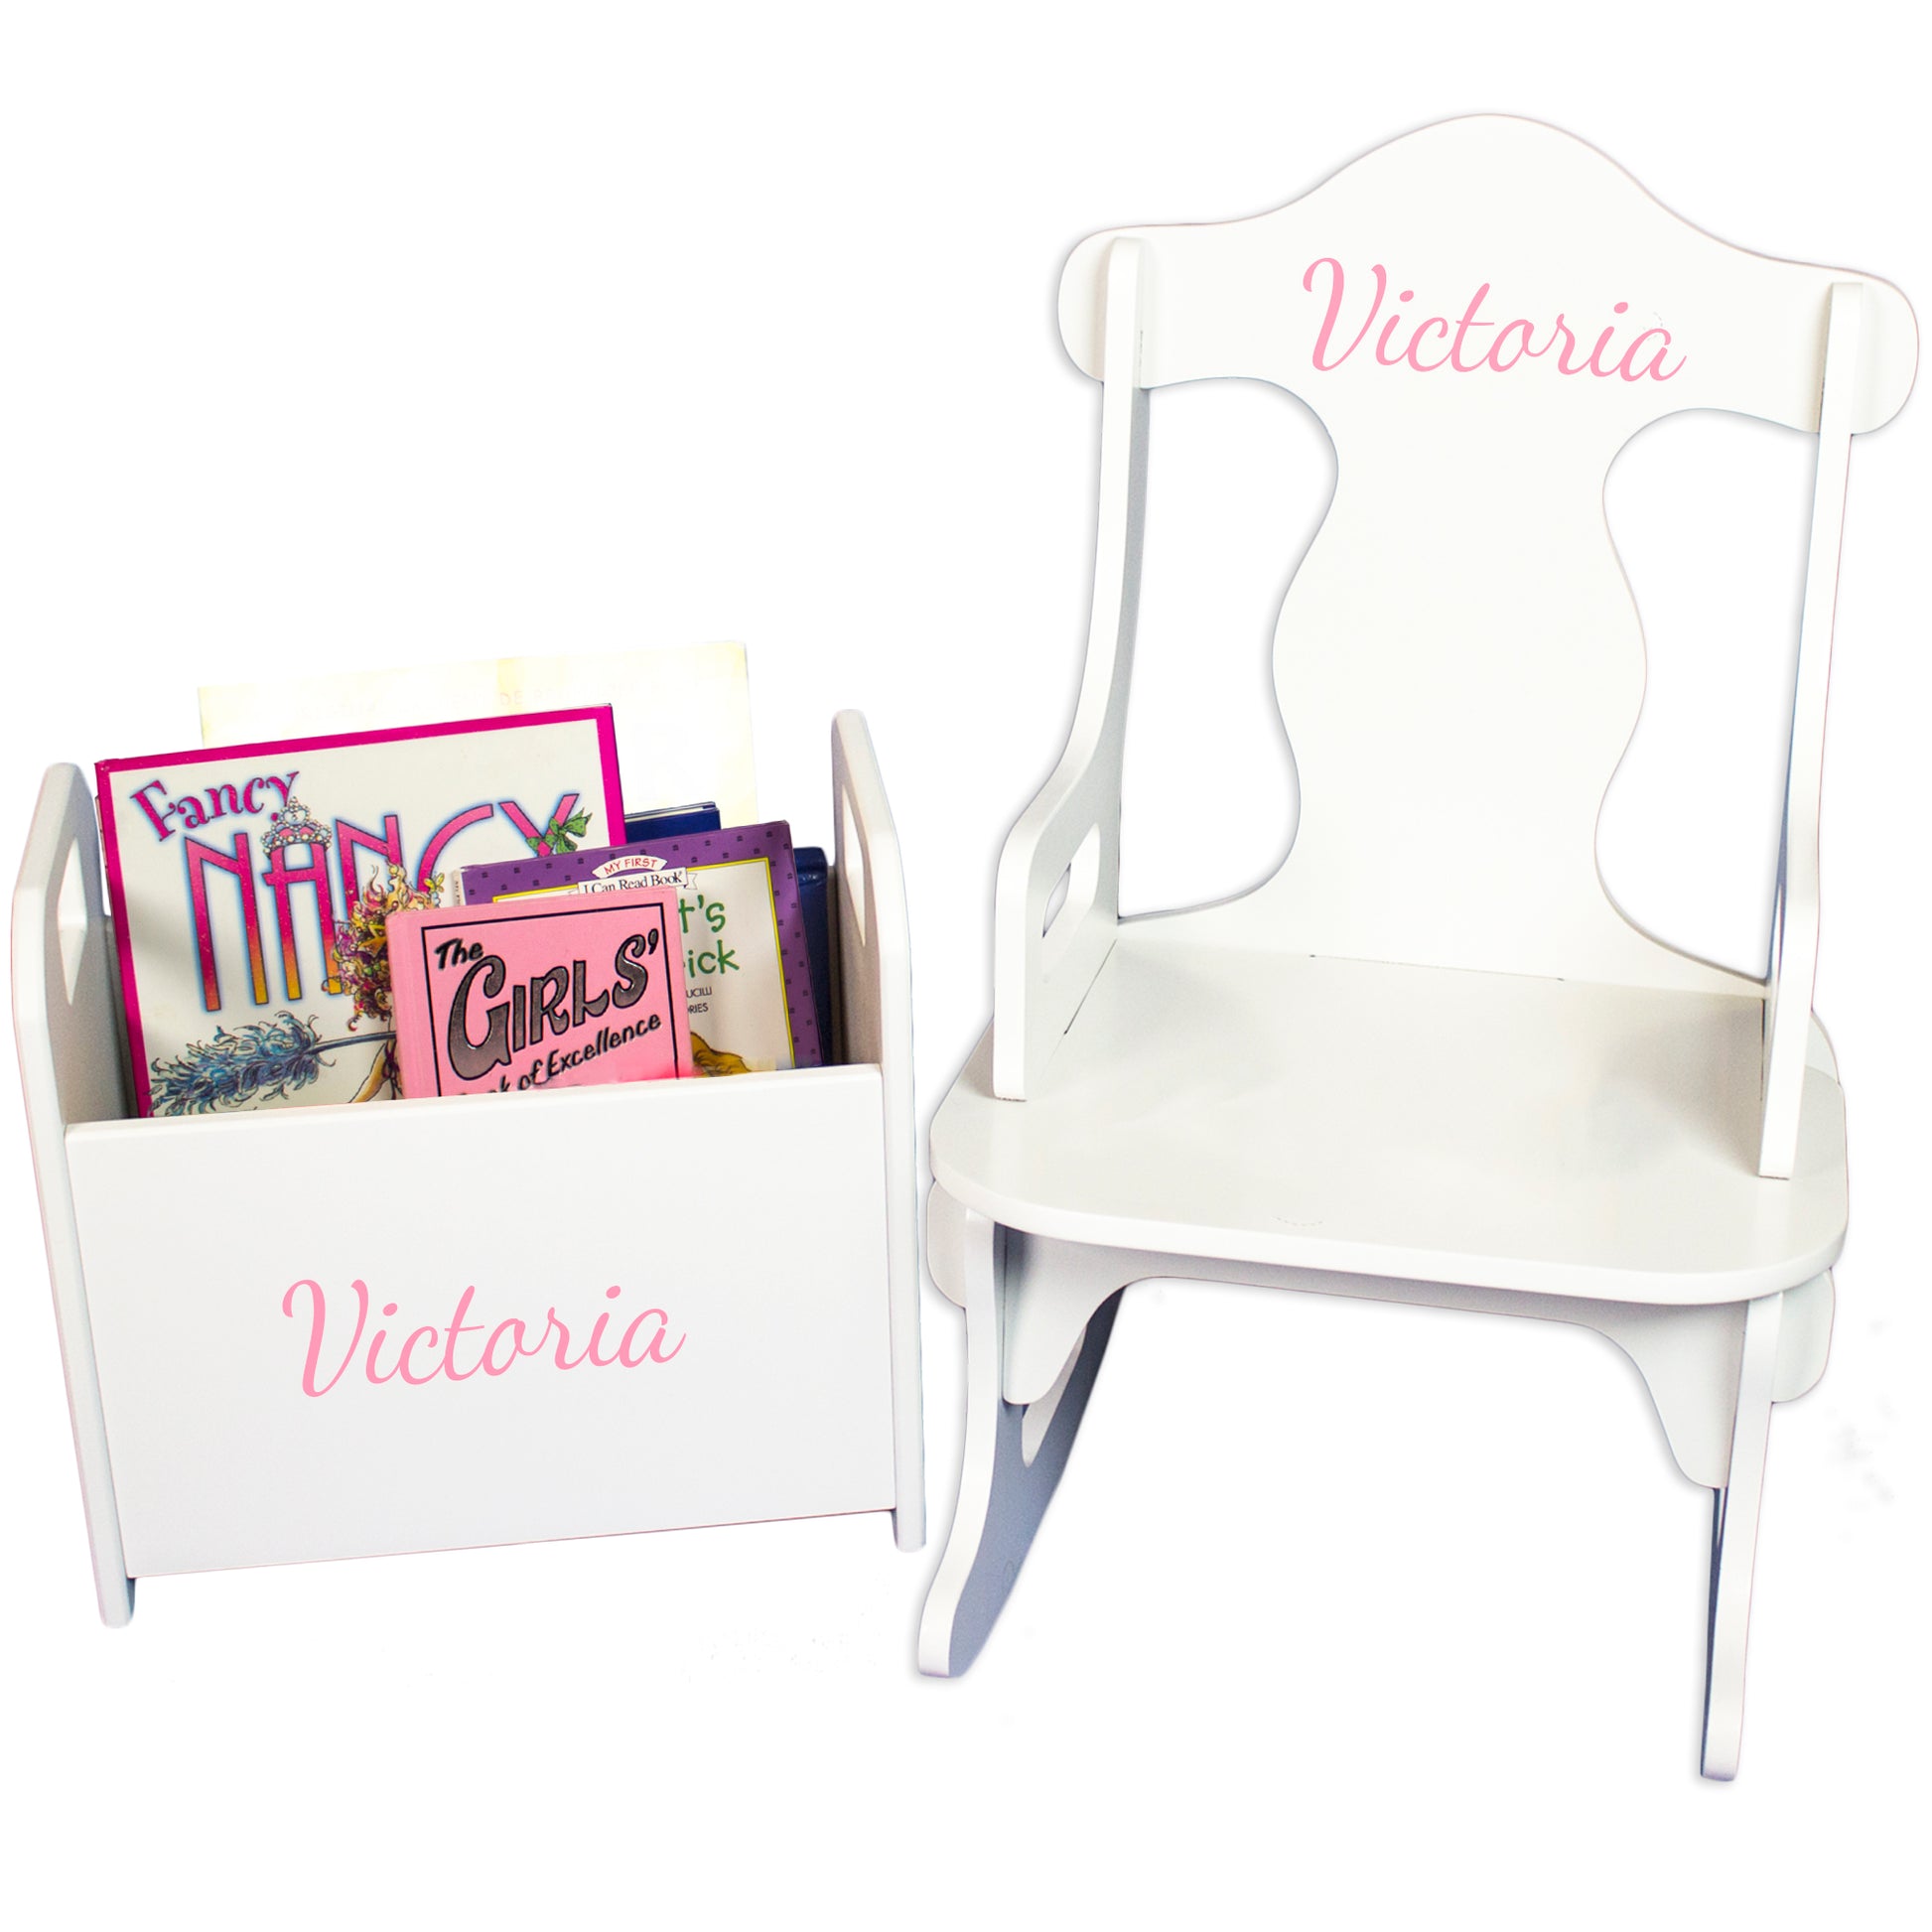 personalized rocking chair book holder gift set